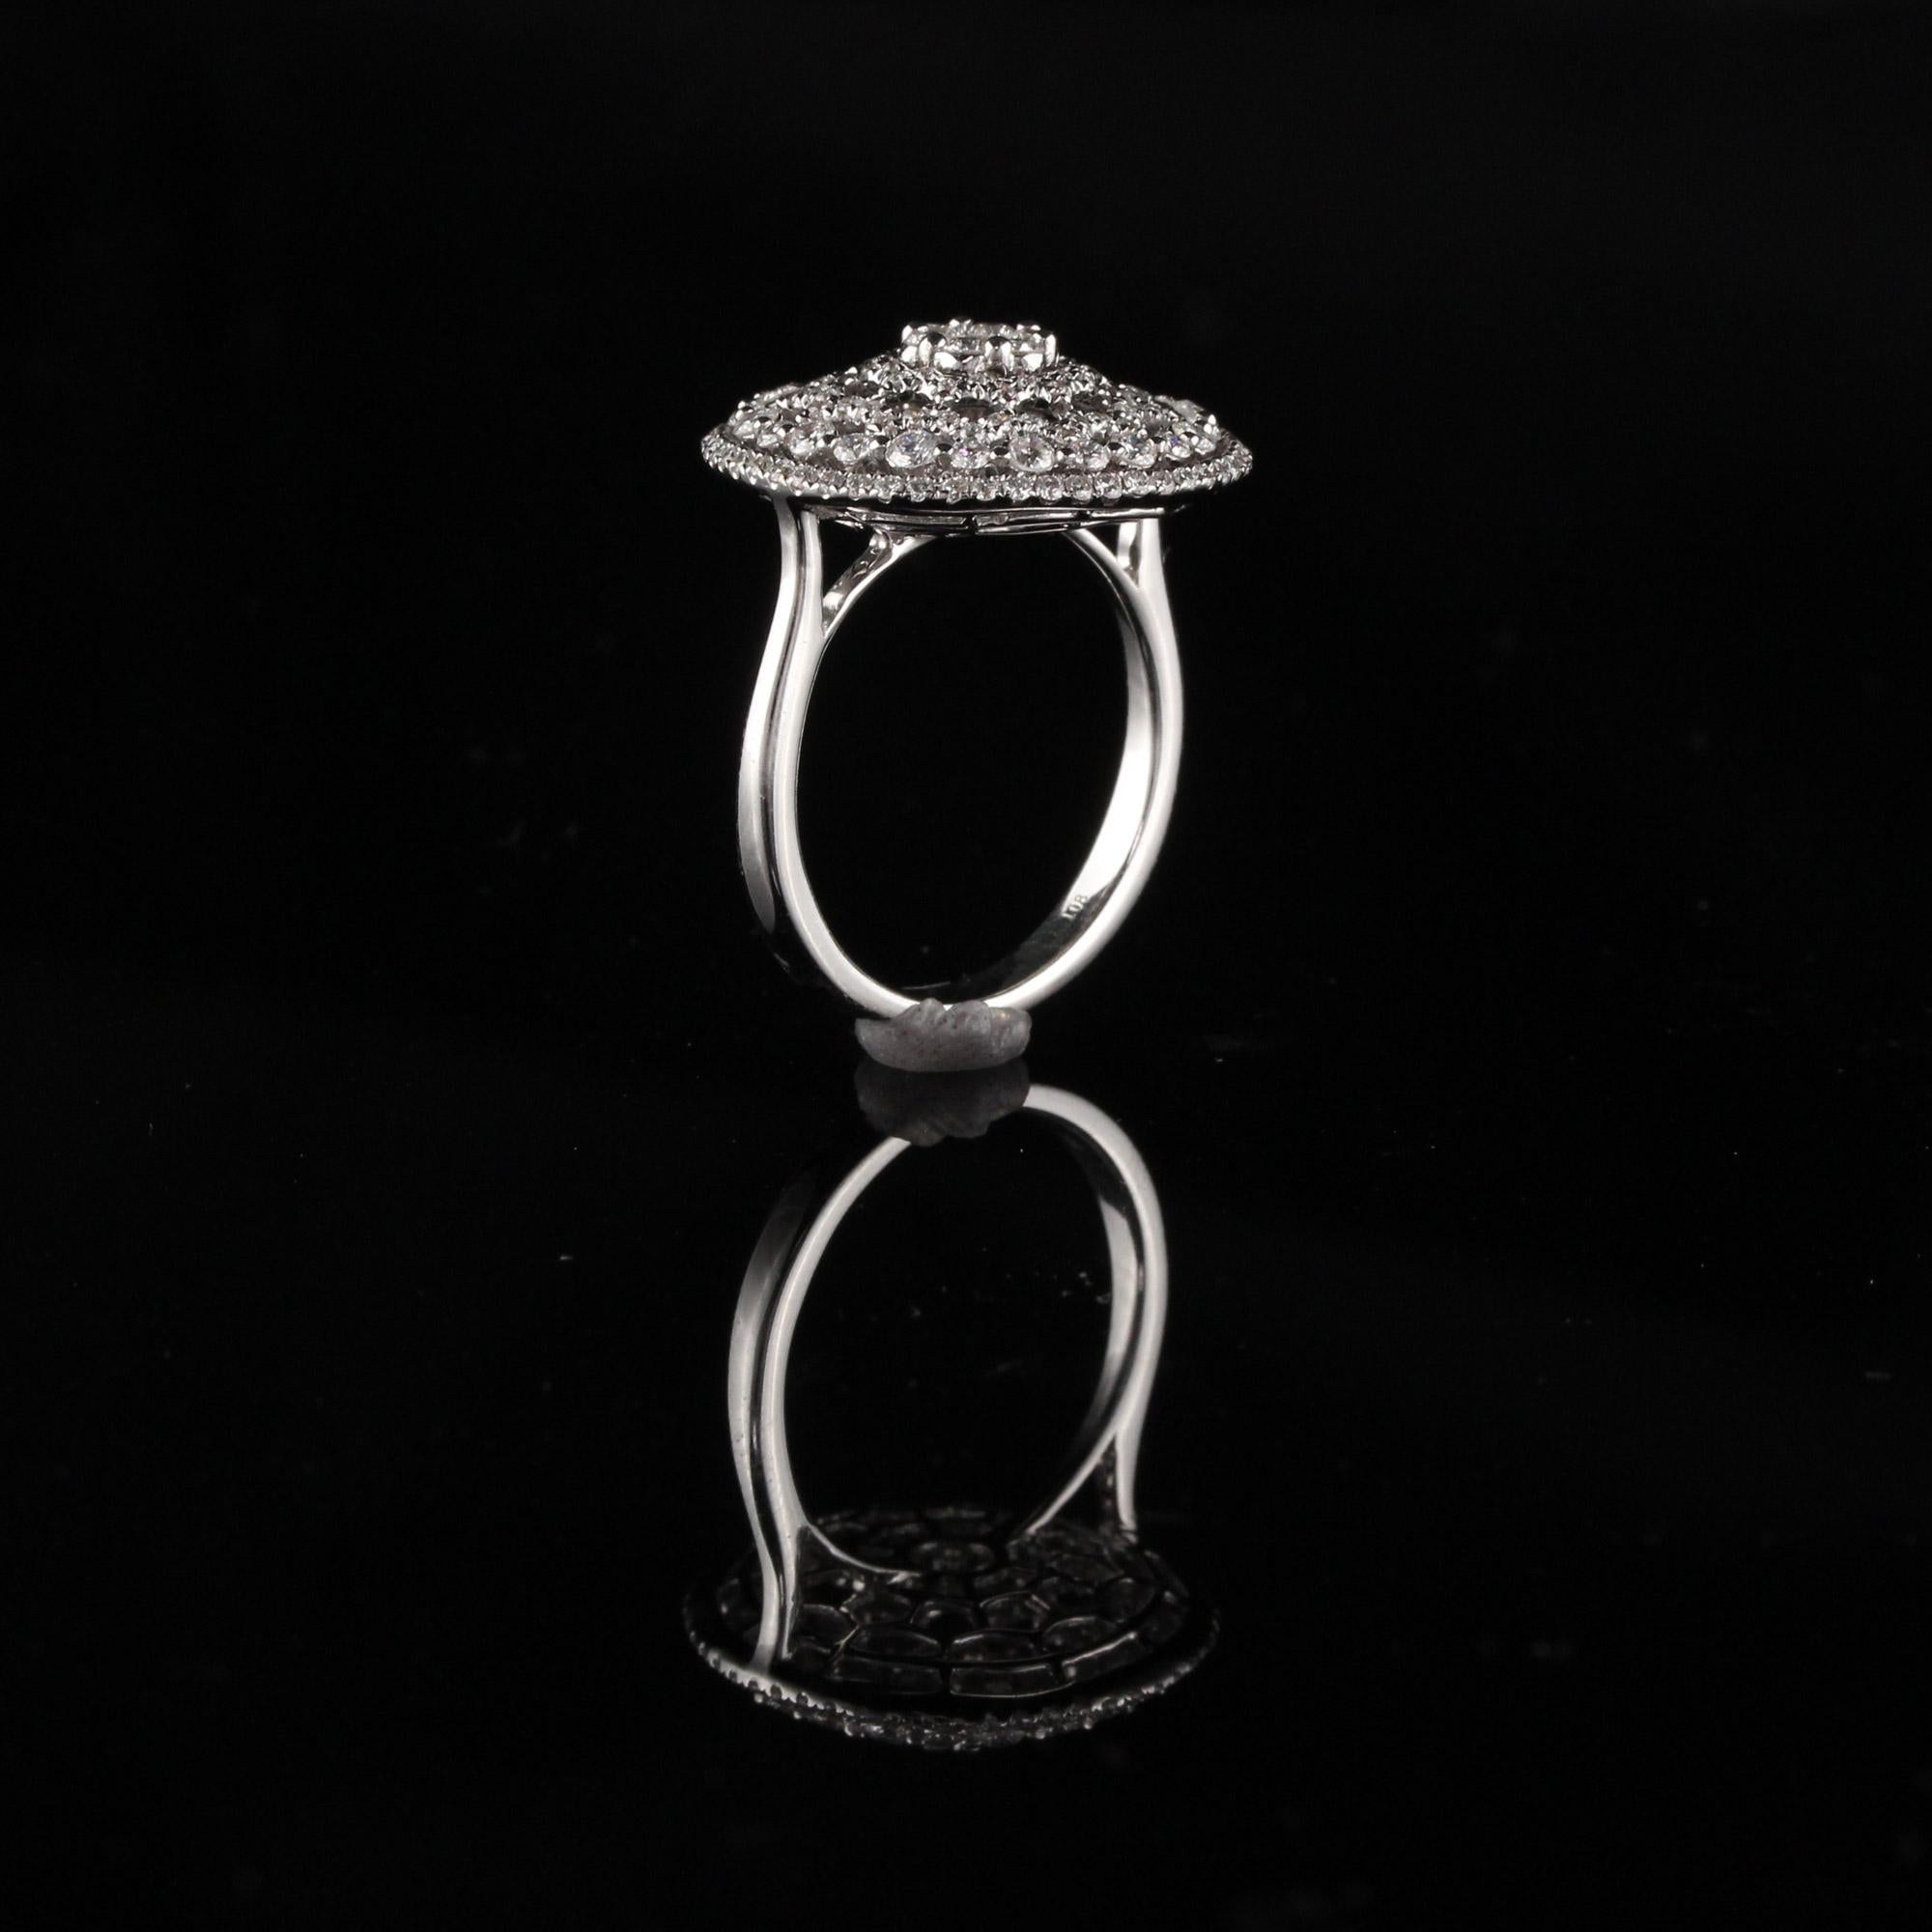 Vintage Estate 14 Karat White Gold Diamond Ring In Excellent Condition For Sale In Great Neck, NY